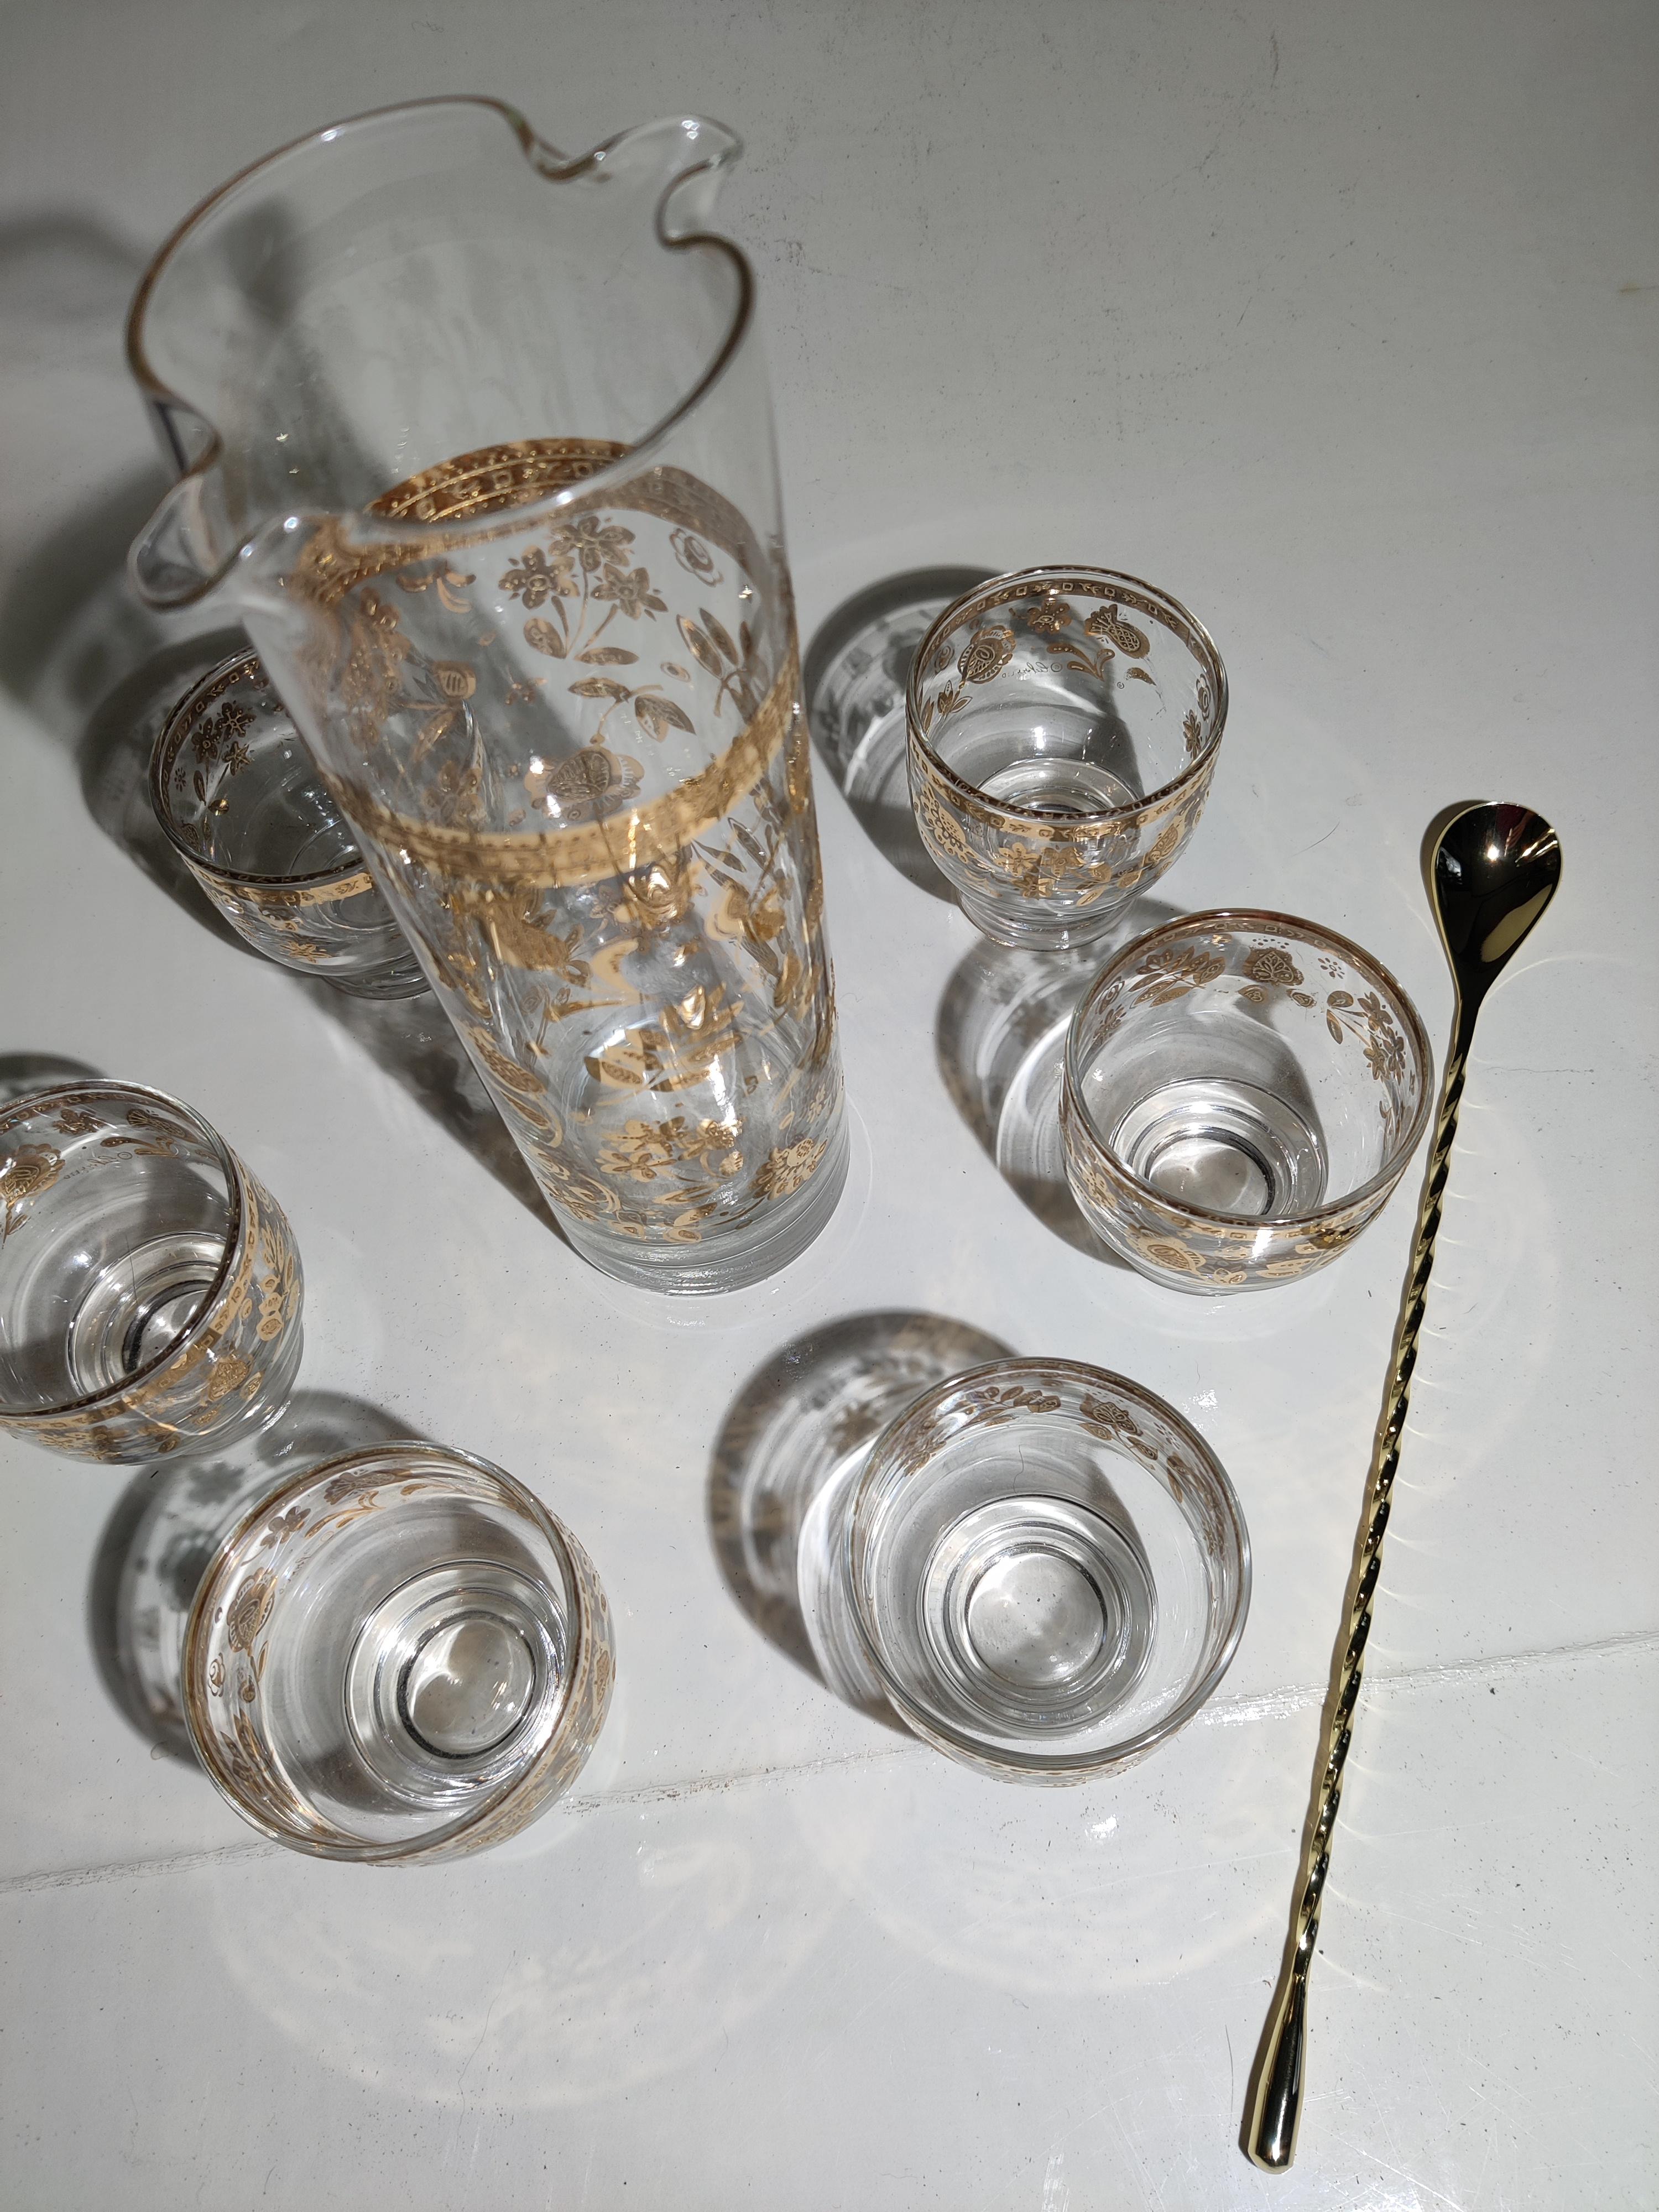 Mid-Century MCM Chantilly Culver Bar Set, Decanter with metal stirrer and six tumblers
22K Gold, excellent condition.
New Metal Stirrer dimensions H 11.75
Tumblers dimensions H 2.88 x D 2.88 at top, 1.75 at base.